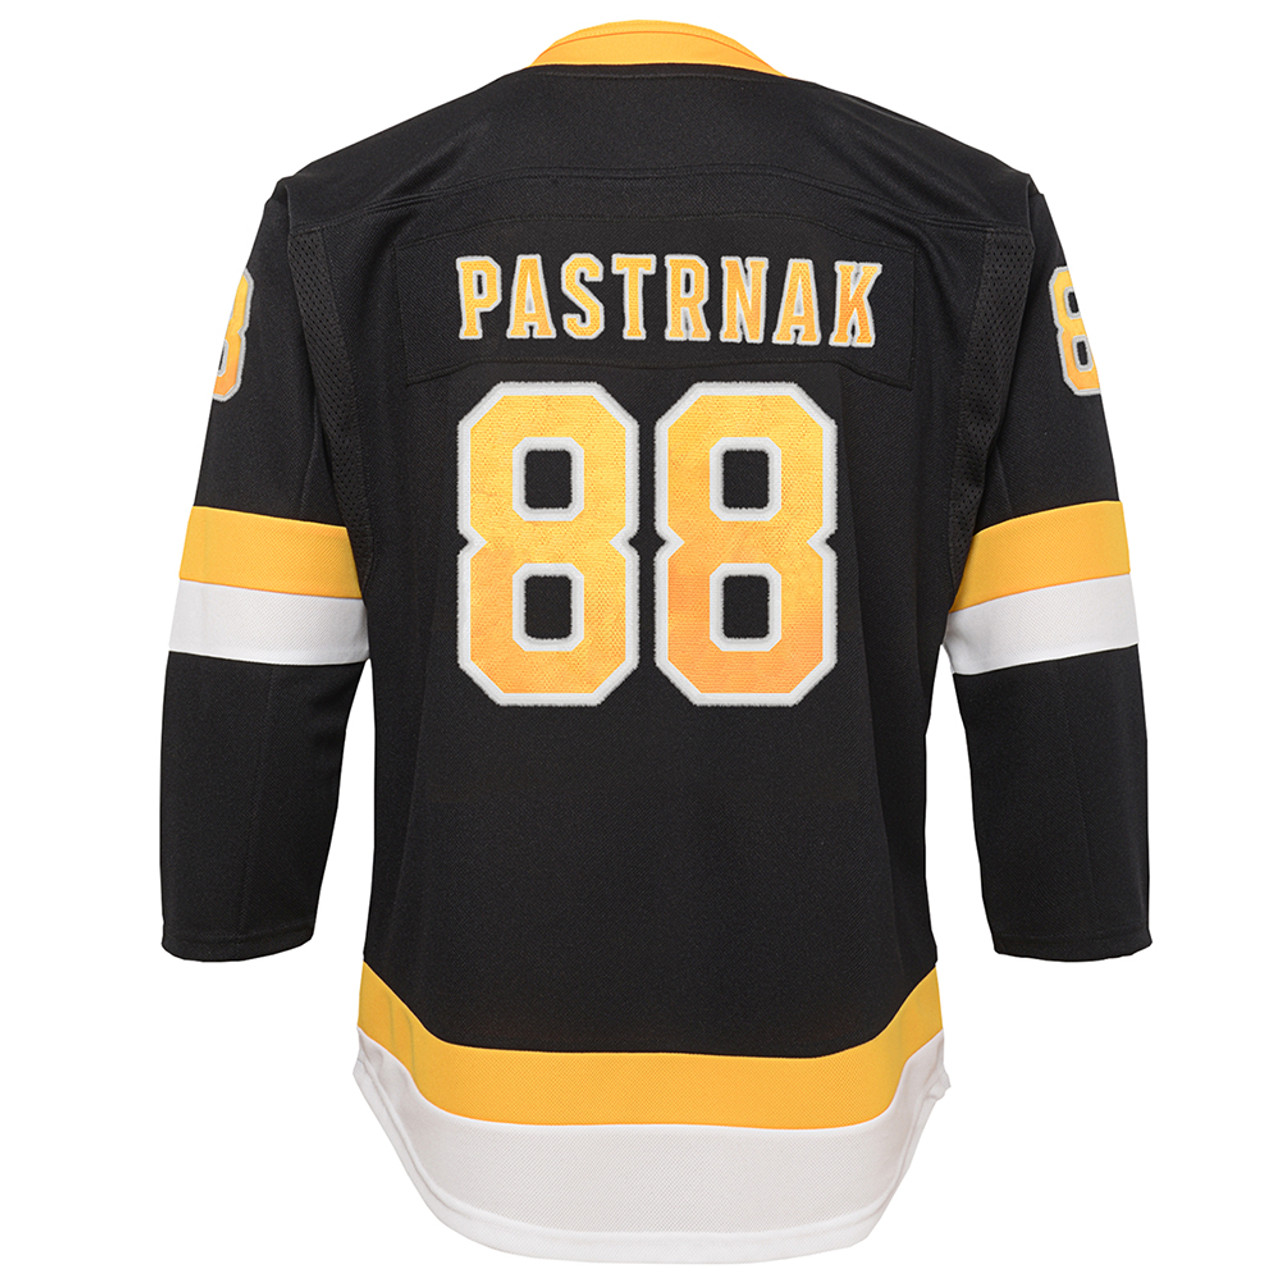 pastrnak youth jersey